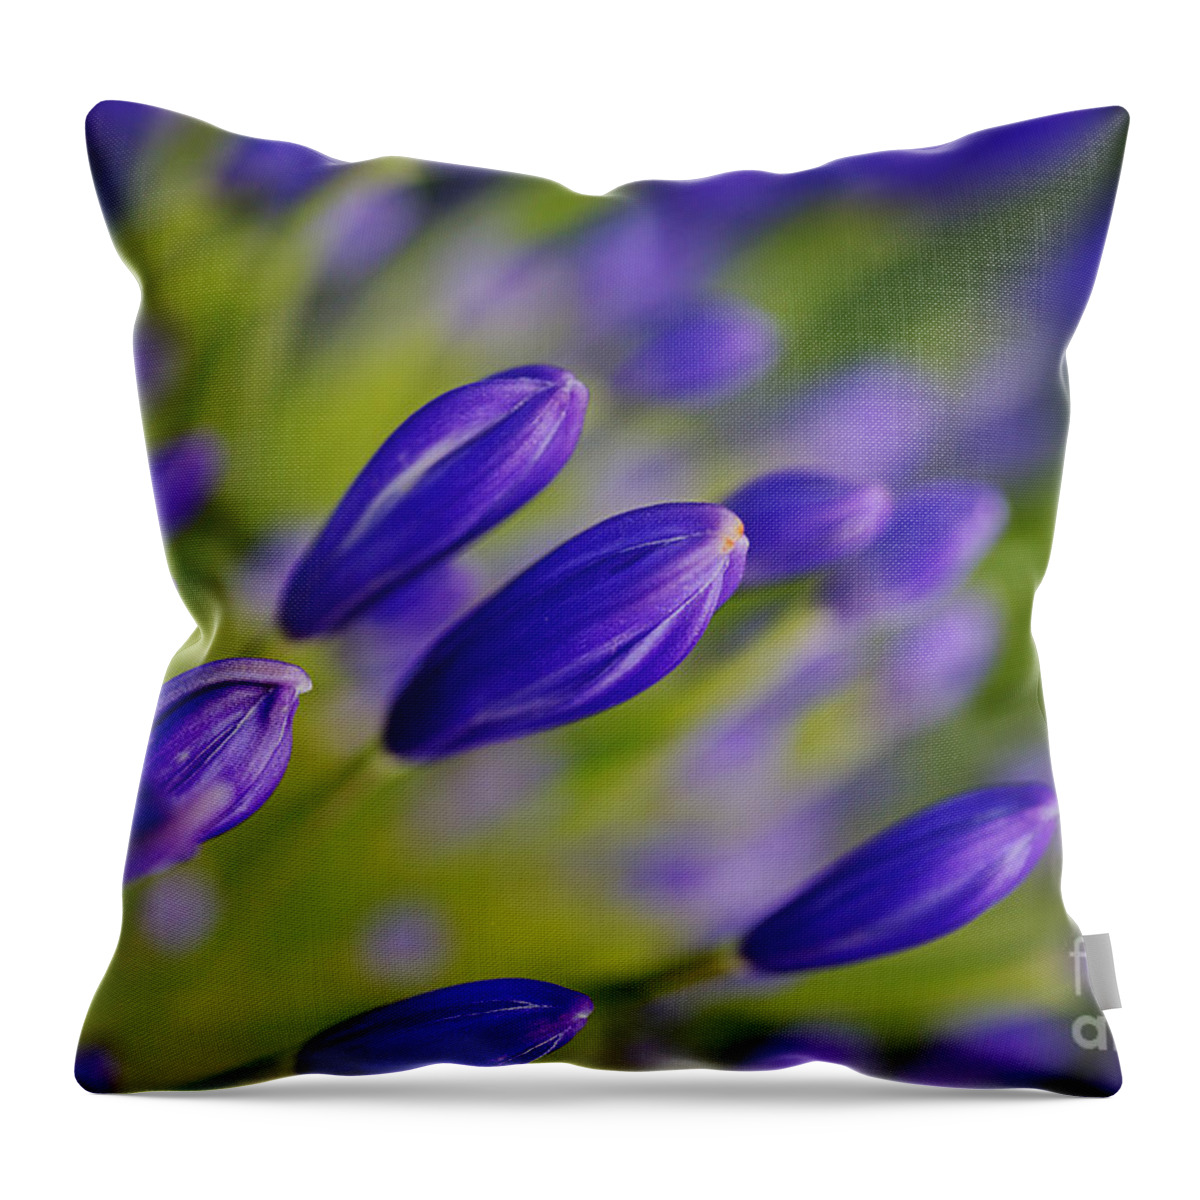 Lily Of The Nile Throw Pillow featuring the photograph Raining Agapanthus Buds by Joy Watson